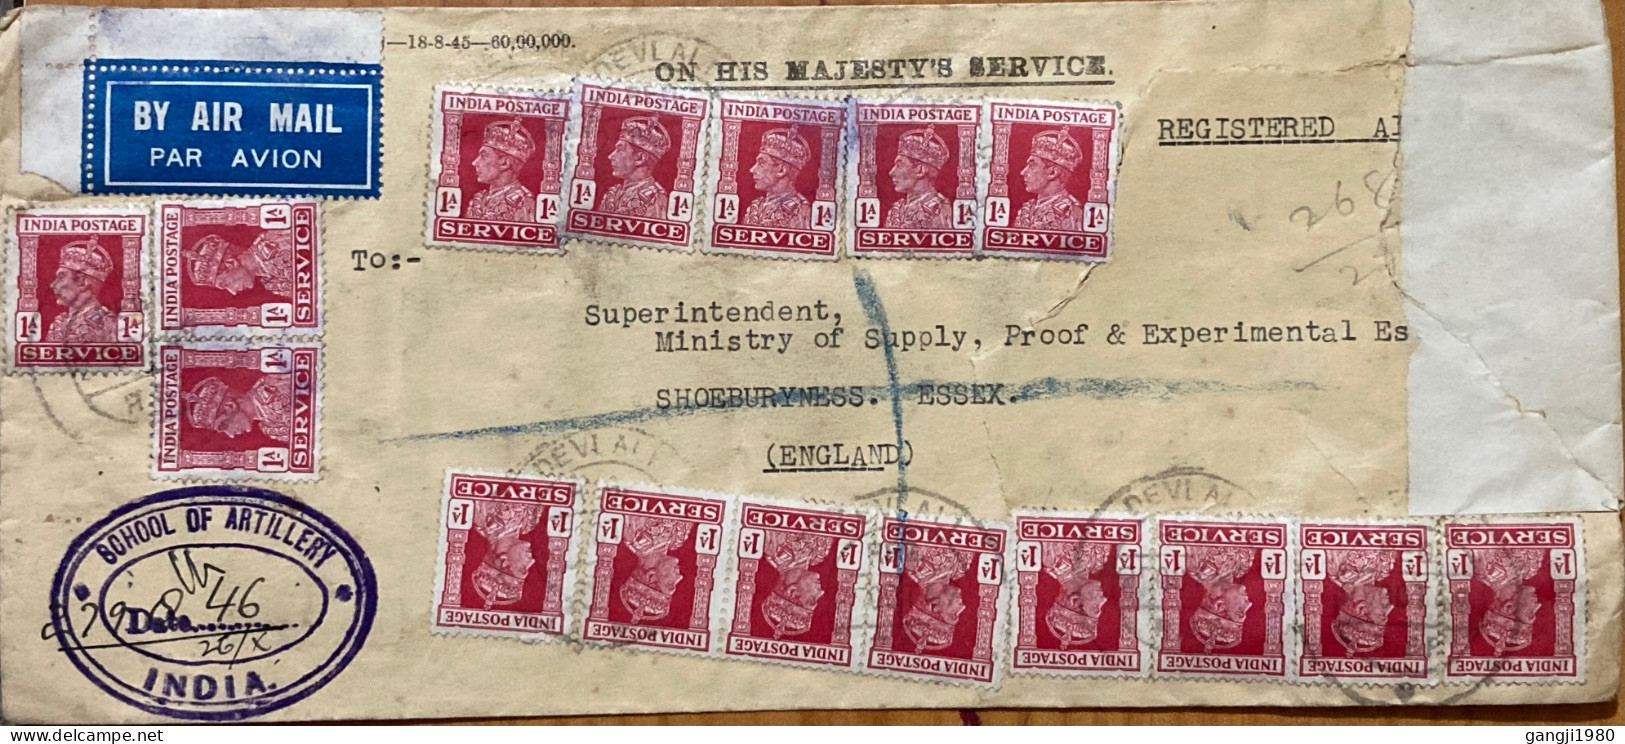 INDIA 1940, REGISTER COVER, USED TO ENGLAND, MILITARY ARMY, SCHOOL OF ARTILLERY, DEVLALI CITY CANCEL, MULTI 16 KING STAM - 1936-47  George VI